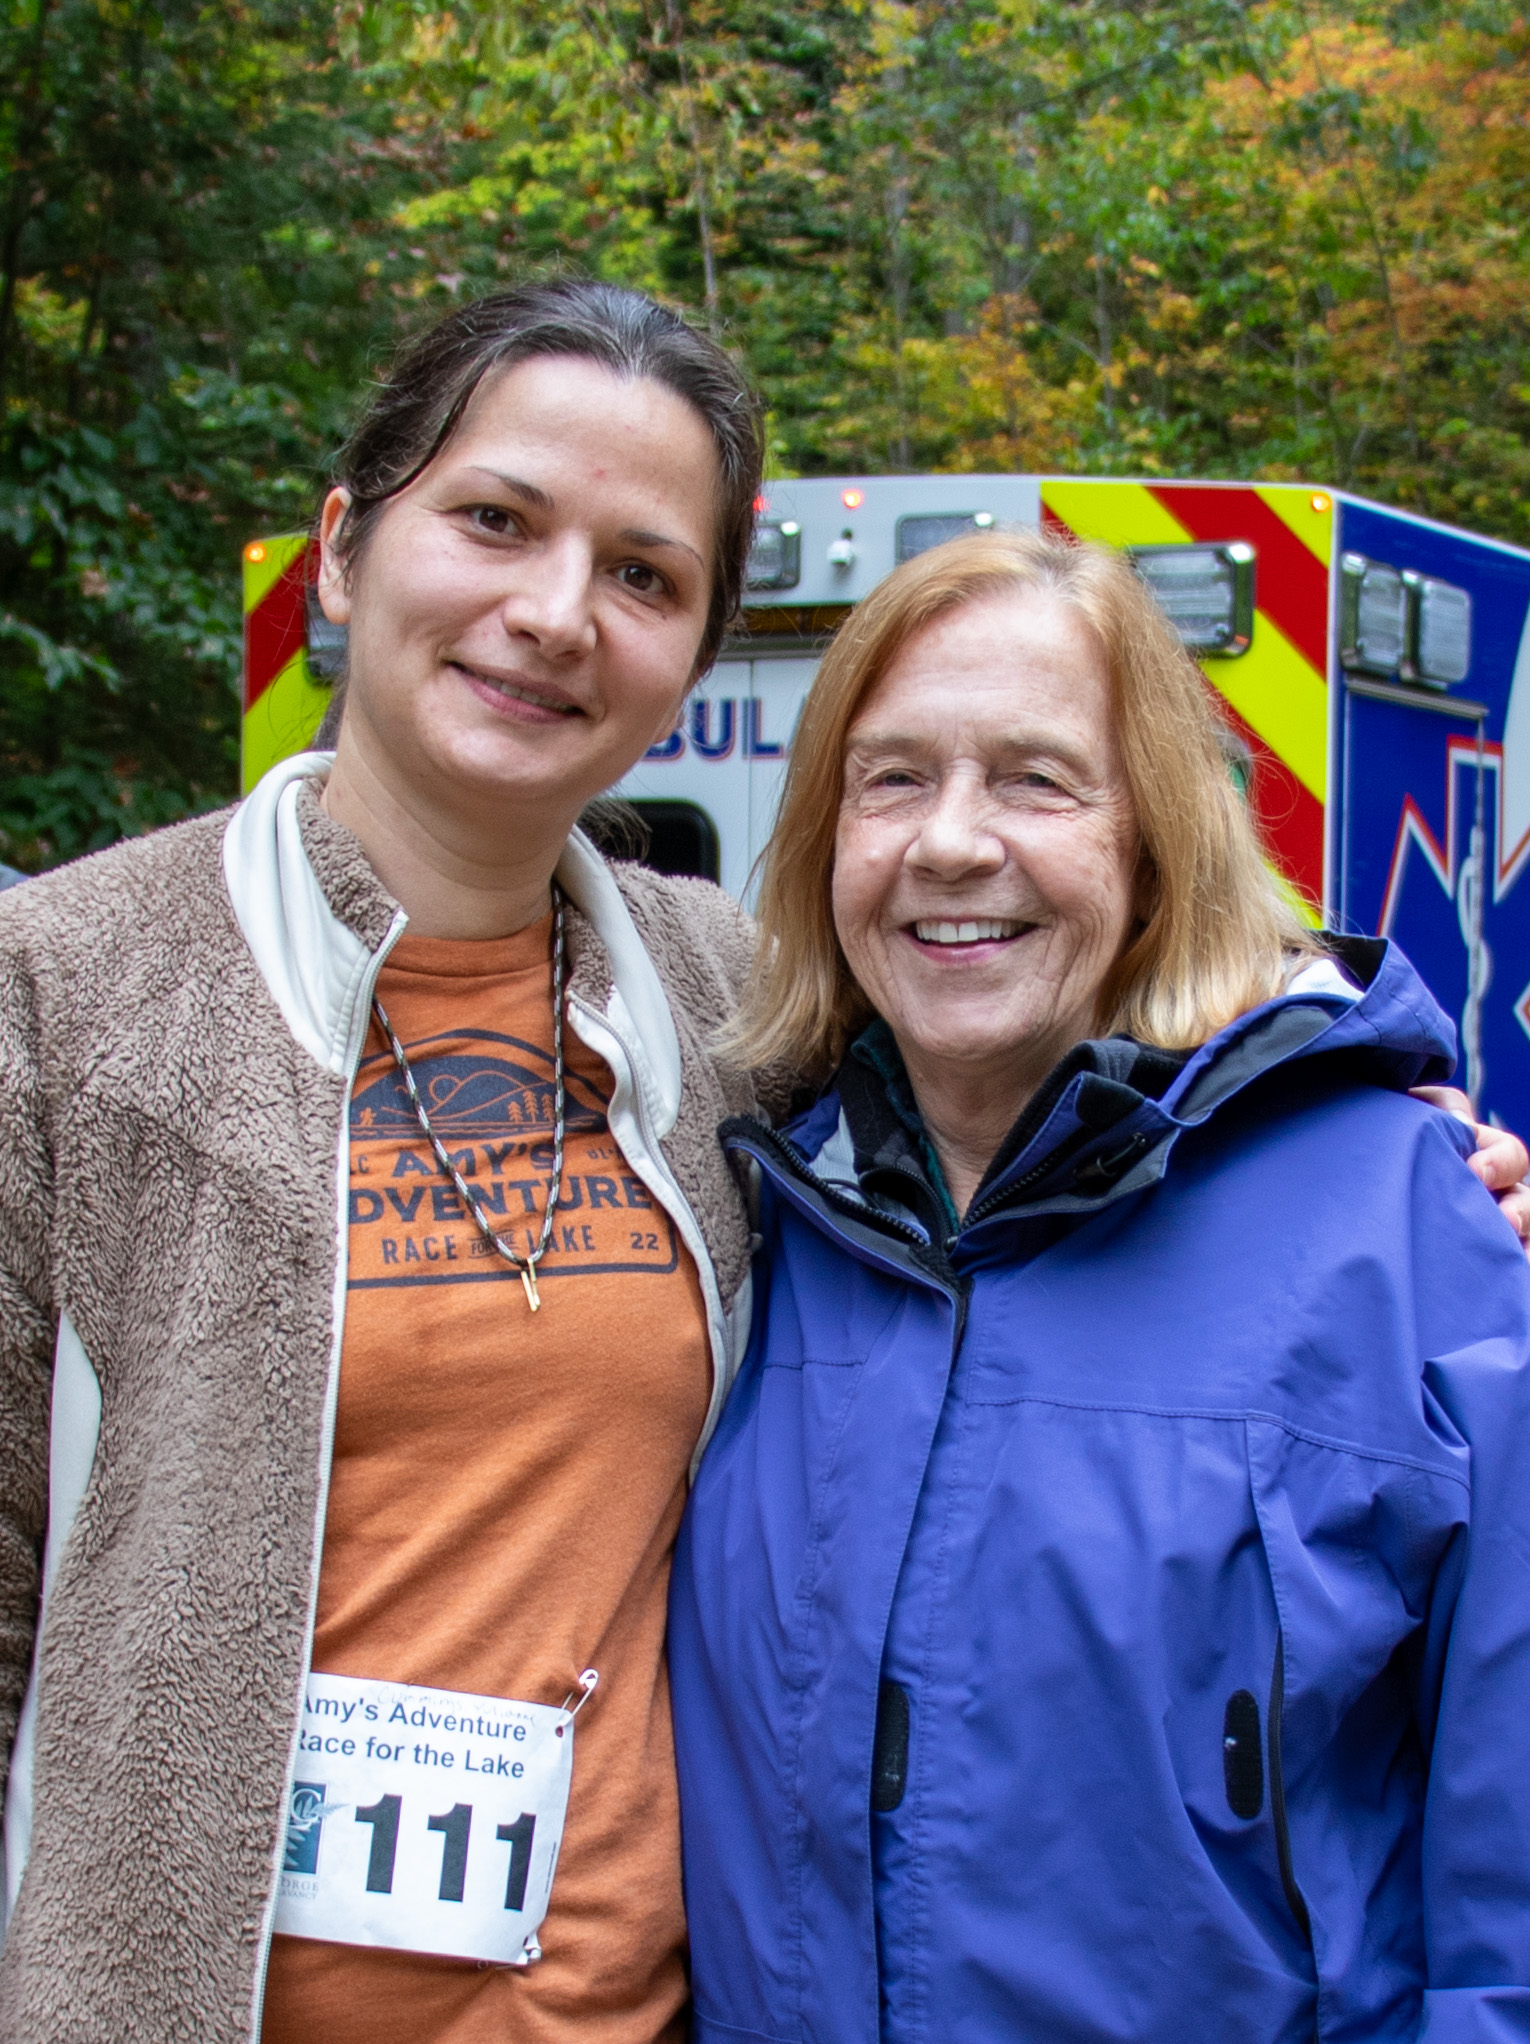 Two women close to each other pose smiling in front of an ambulance.